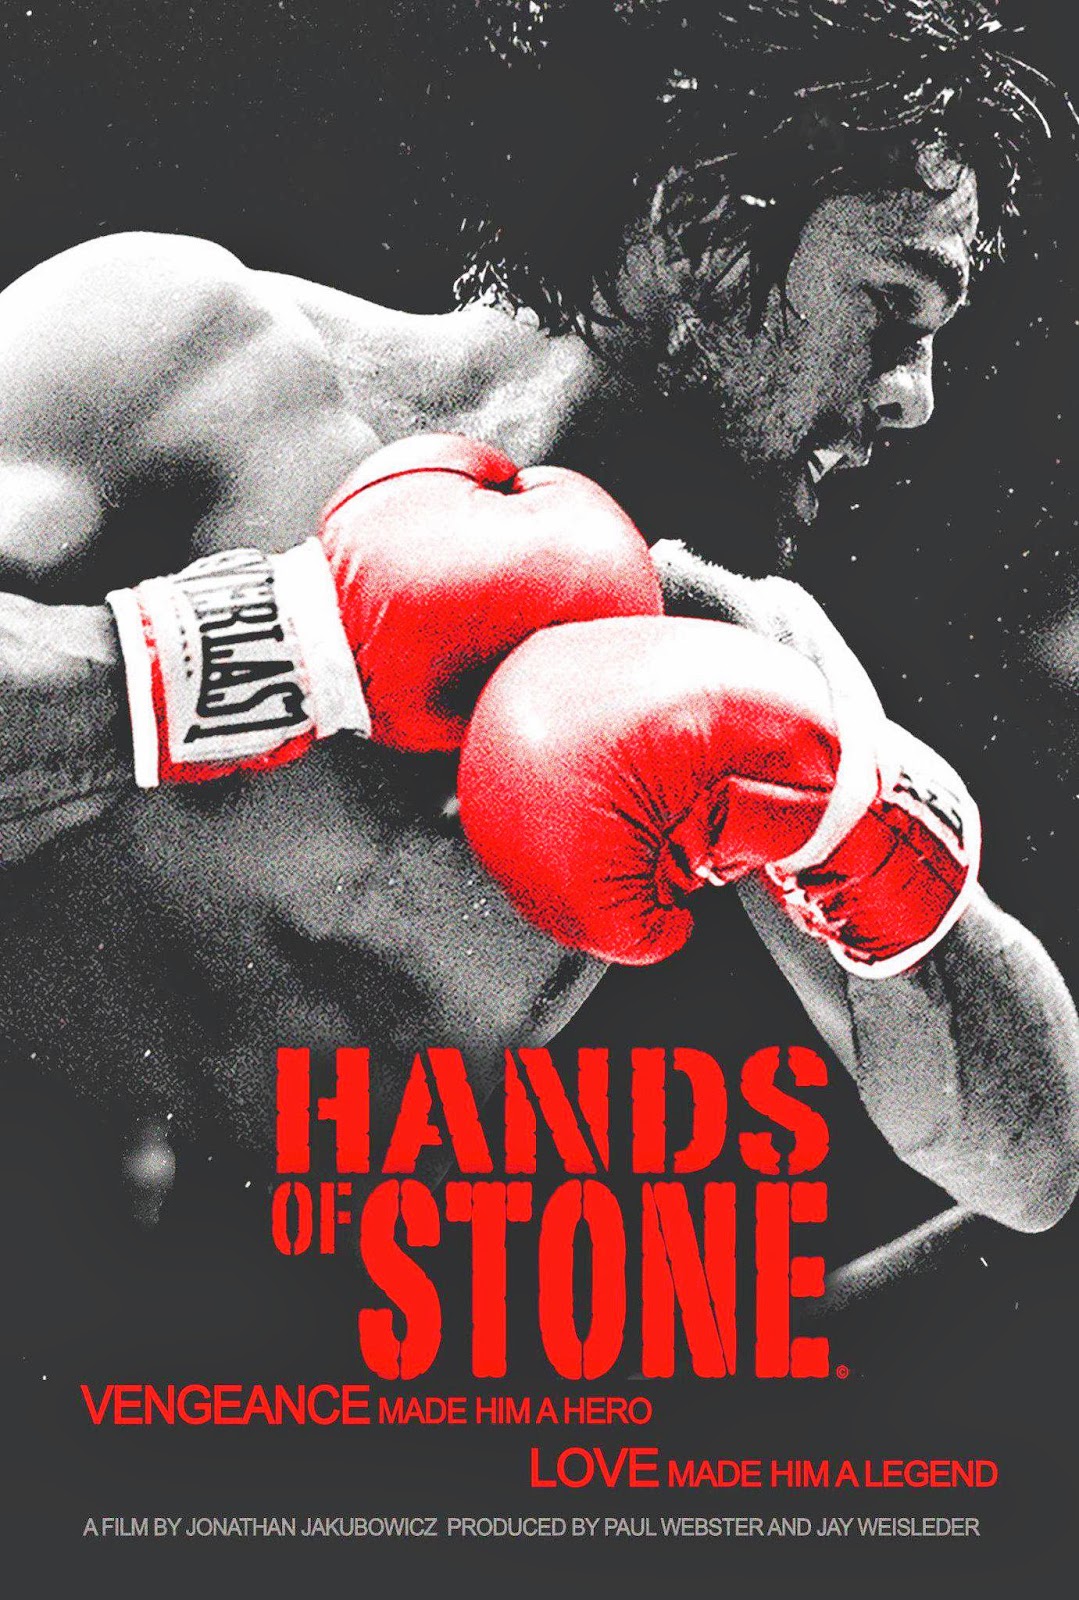 Hands of Stone Movie (CLICK POSTER TO SEE TRAILER OF FILM)